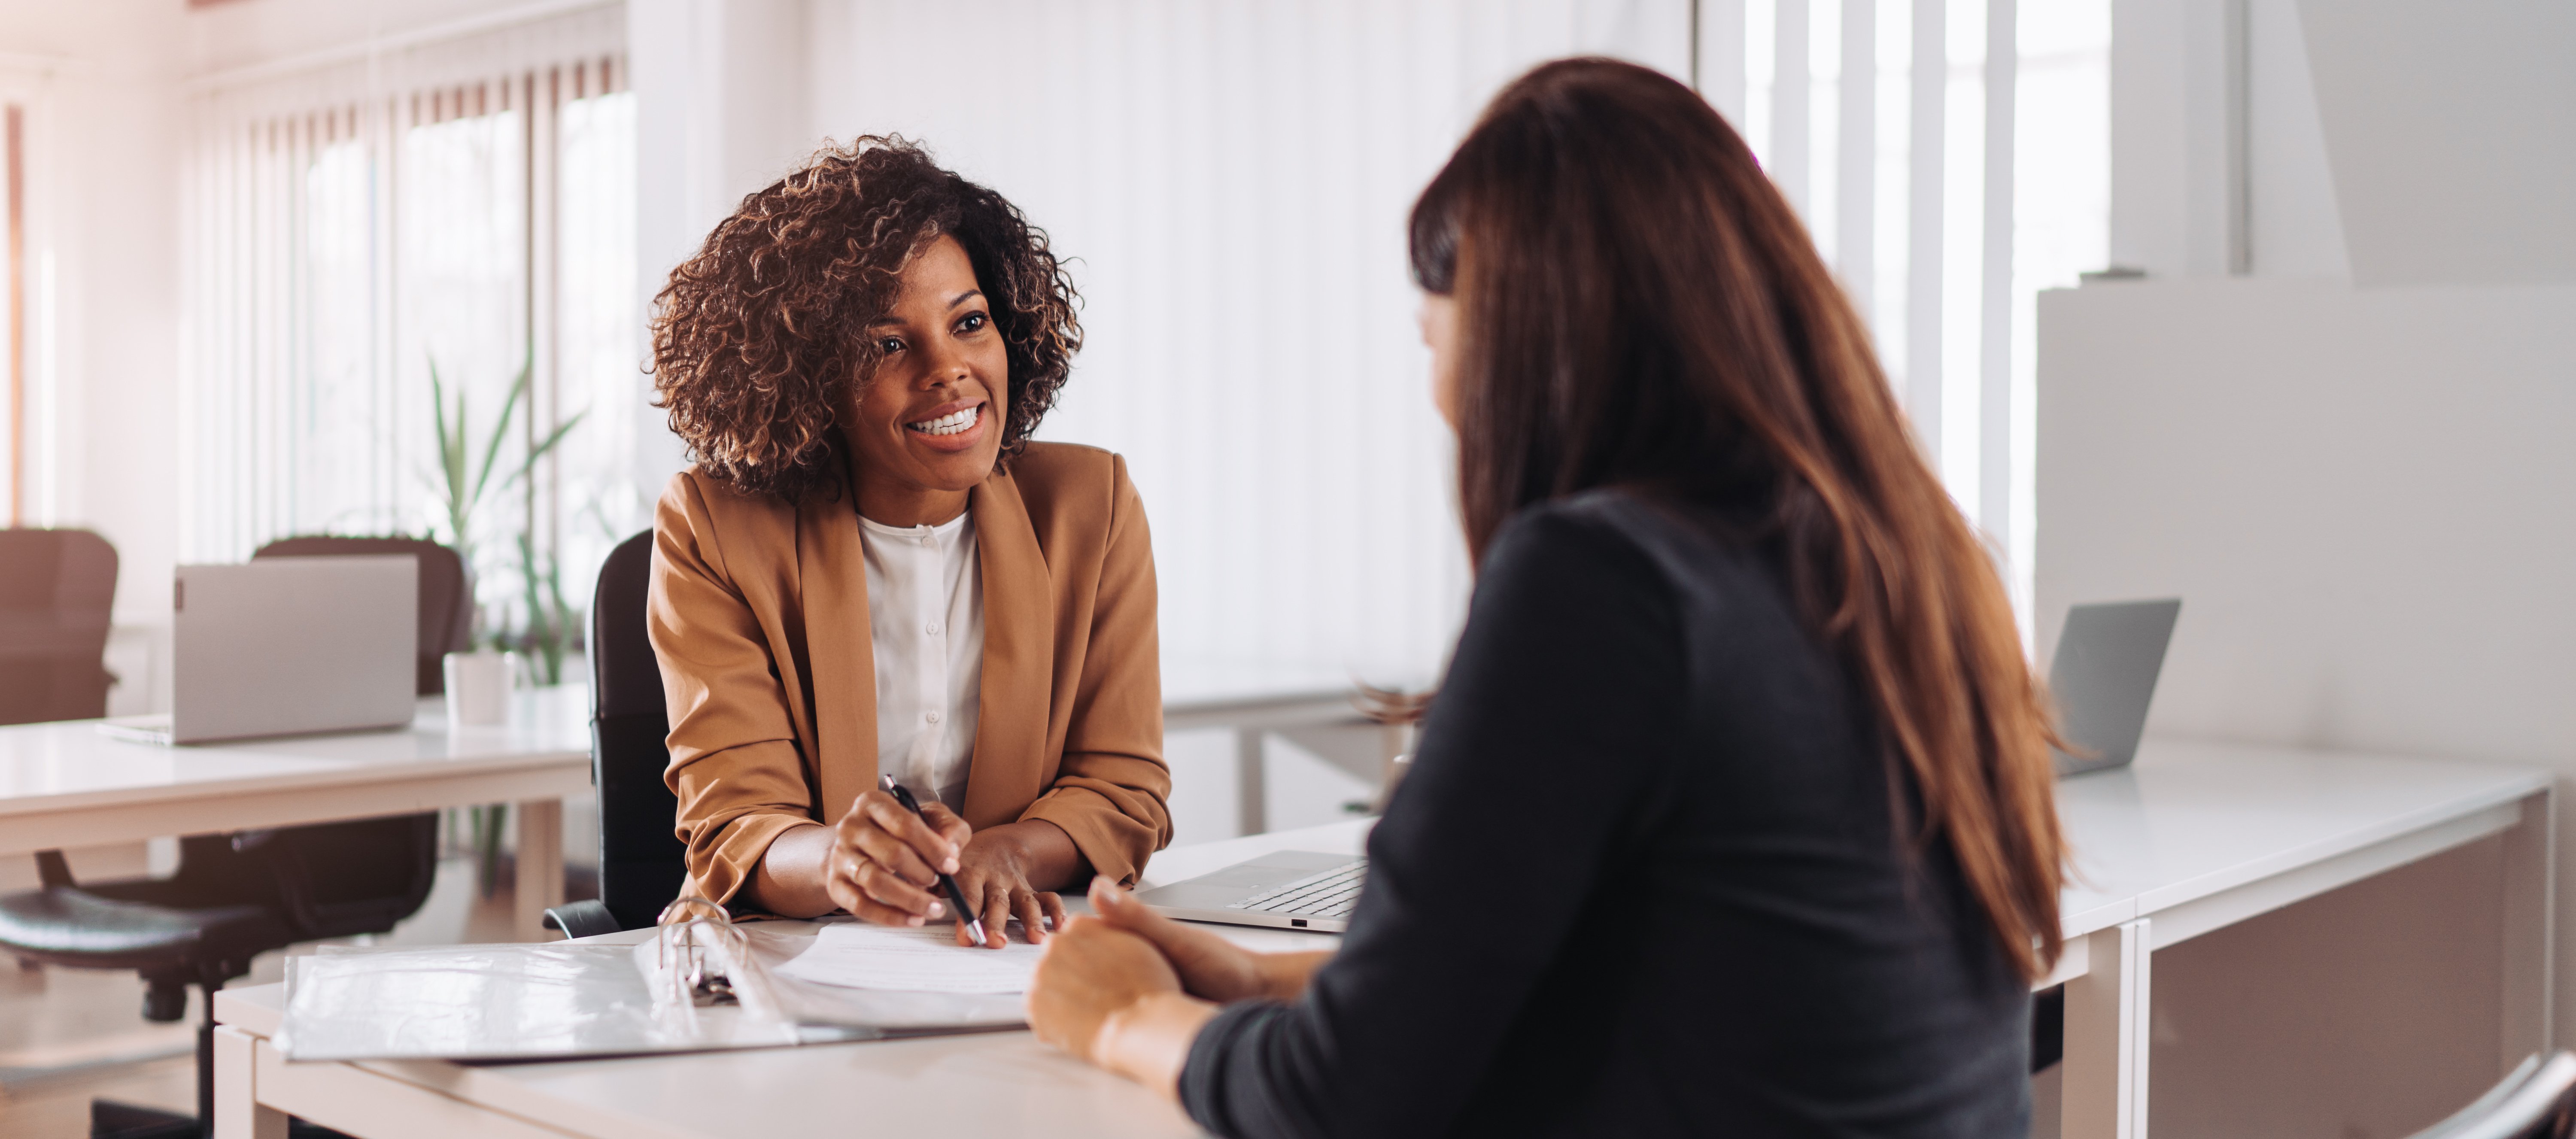 A smiling woman in a brown blazer is having a meeting with a client, discussing compliance consulting and auditing services to achieve and maintain regulatory and data privacy standards.